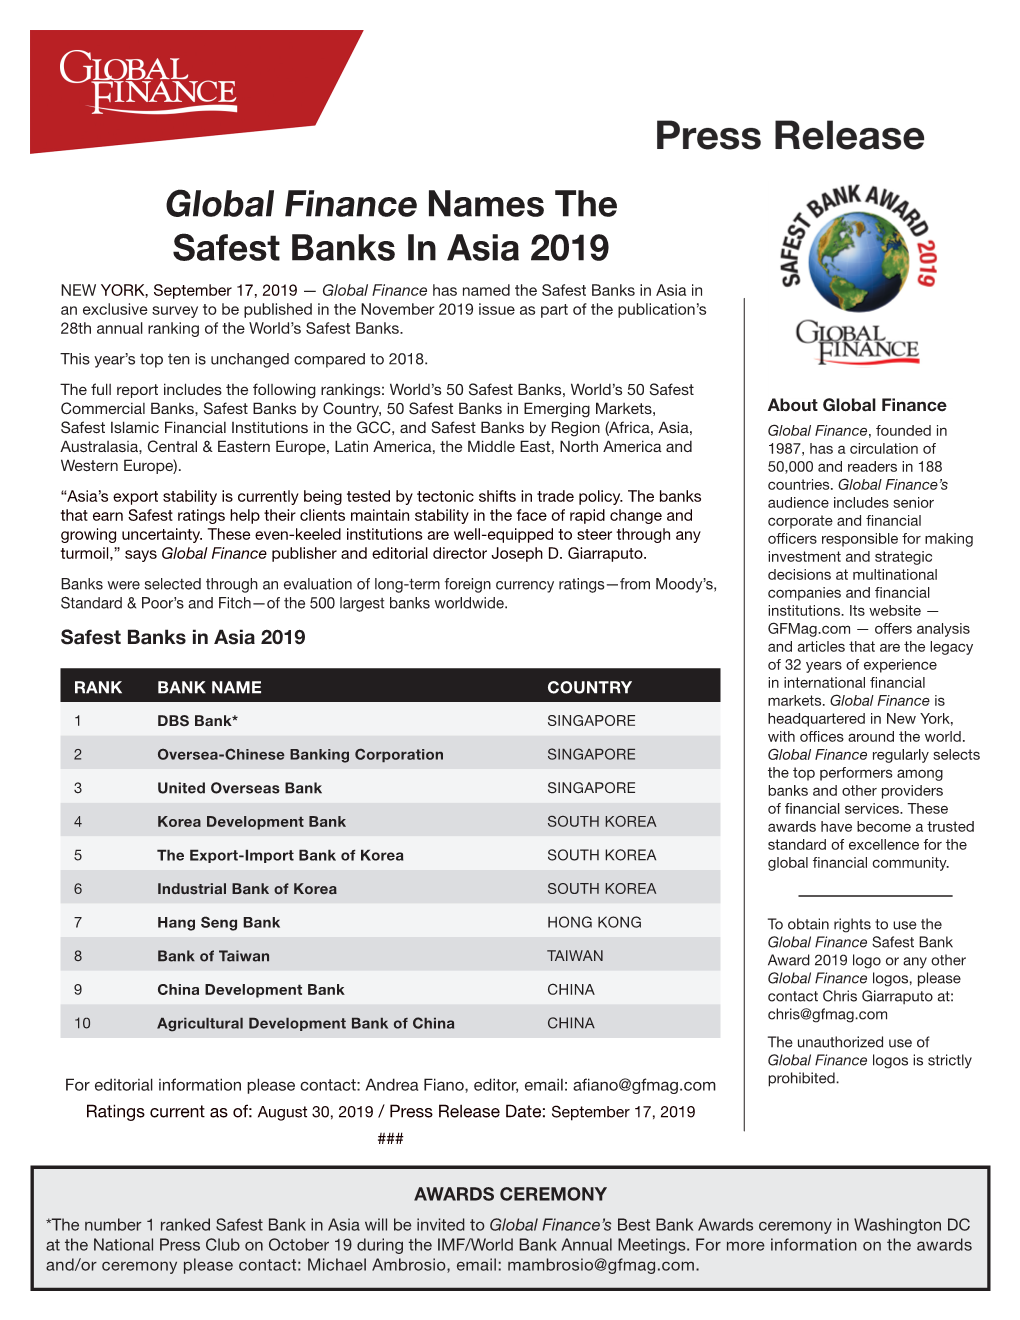 Global Finance Names the Safest Banks in Asia 2019